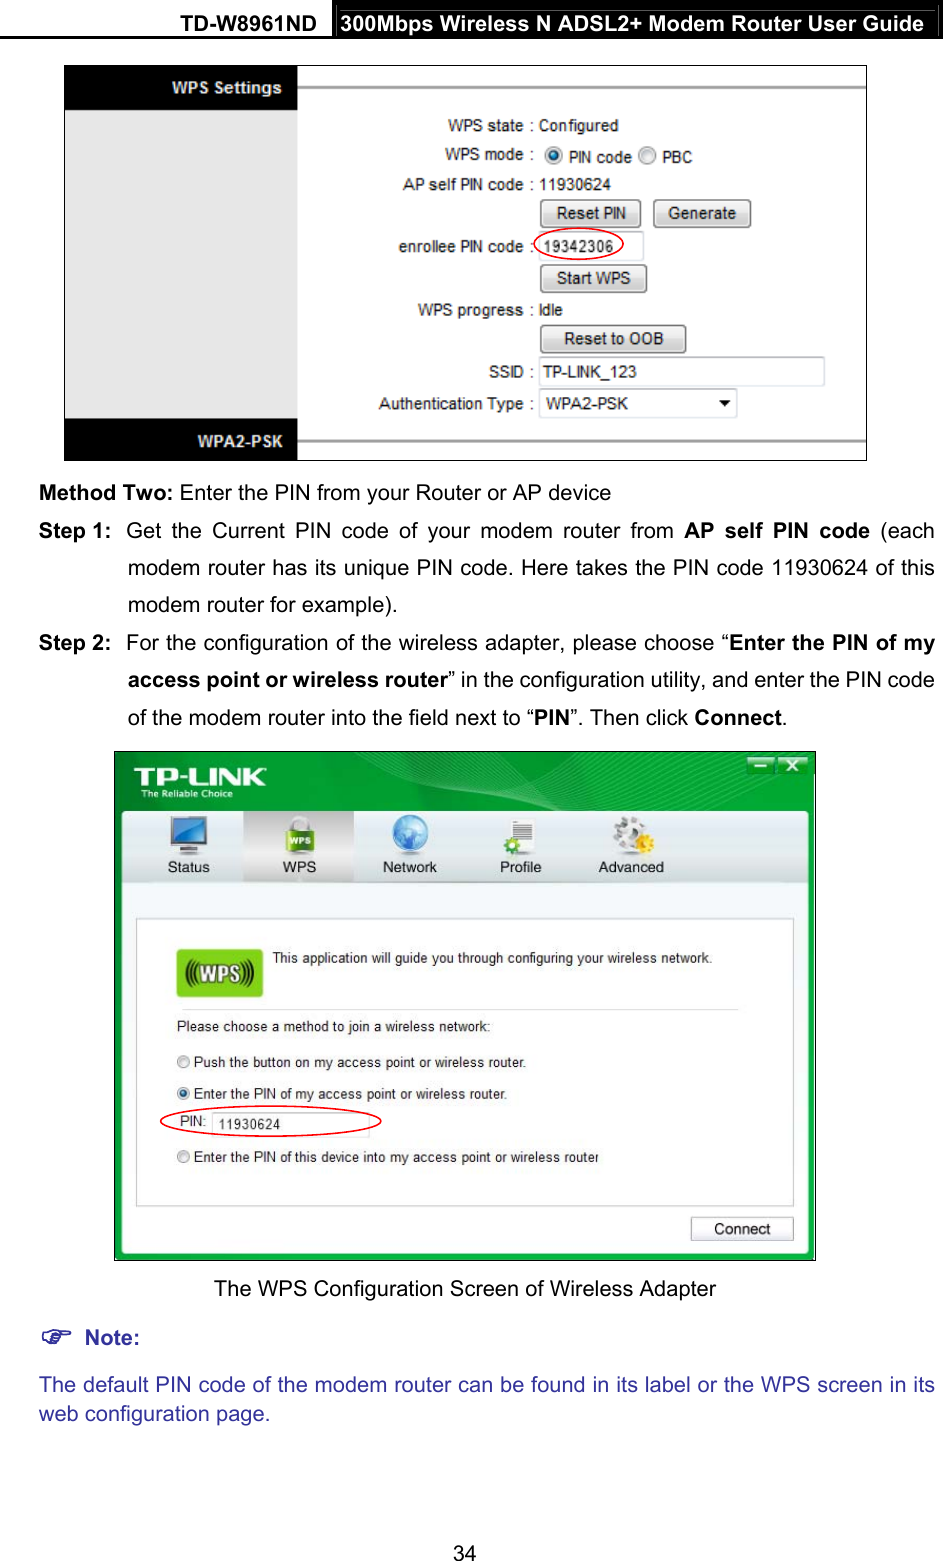 TD-W8961ND  300Mbps Wireless N ADSL2+ Modem Router User Guide  34 Method Two: Enter the PIN from your Router or AP device Step 1:  Get the Current PIN code of your modem router from AP self PIN code (each modem router has its unique PIN code. Here takes the PIN code 11930624 of this modem router for example).   Step 2:  For the configuration of the wireless adapter, please choose “Enter the PIN of my access point or wireless router” in the configuration utility, and enter the PIN code of the modem router into the field next to “PIN”. Then click Connect.  The WPS Configuration Screen of Wireless Adapter  Note: The default PIN code of the modem router can be found in its label or the WPS screen in its web configuration page. 